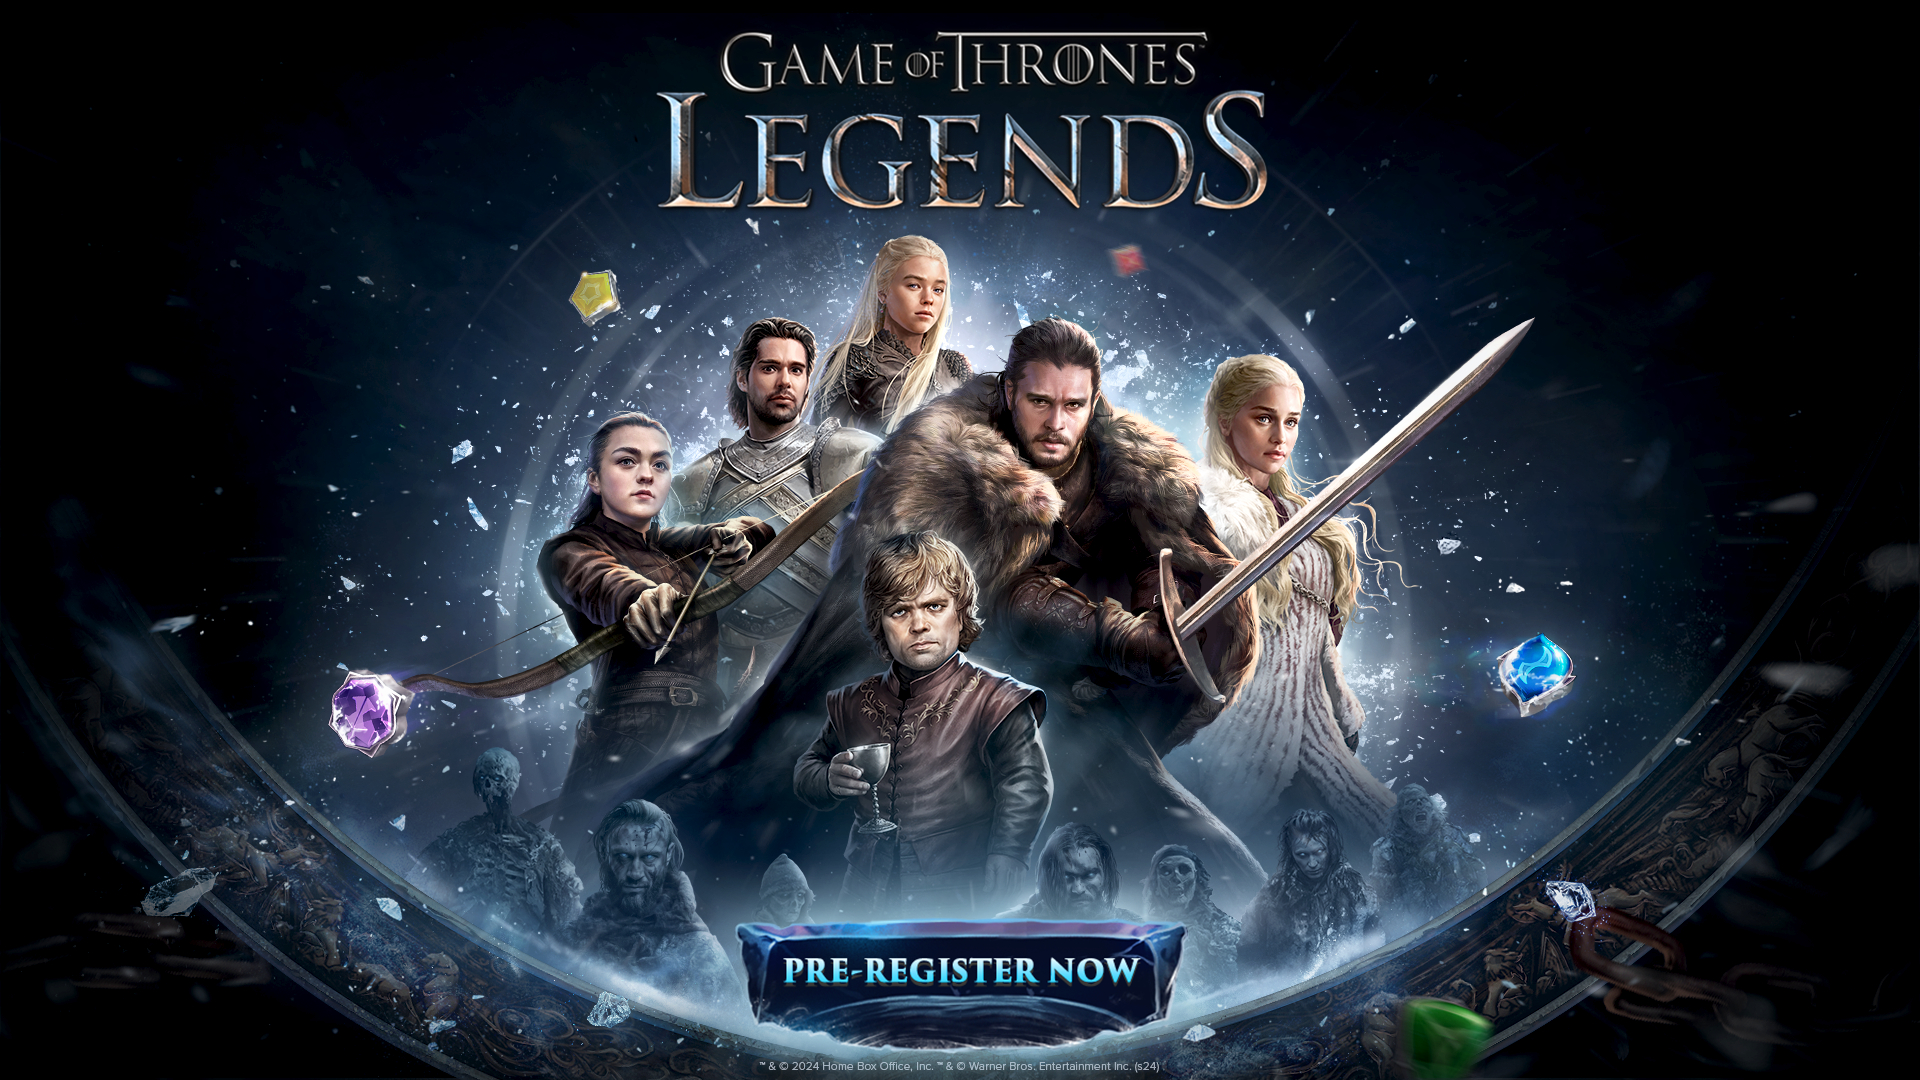 Game of Thrones: Legends RPG Opens Pre-registration Now